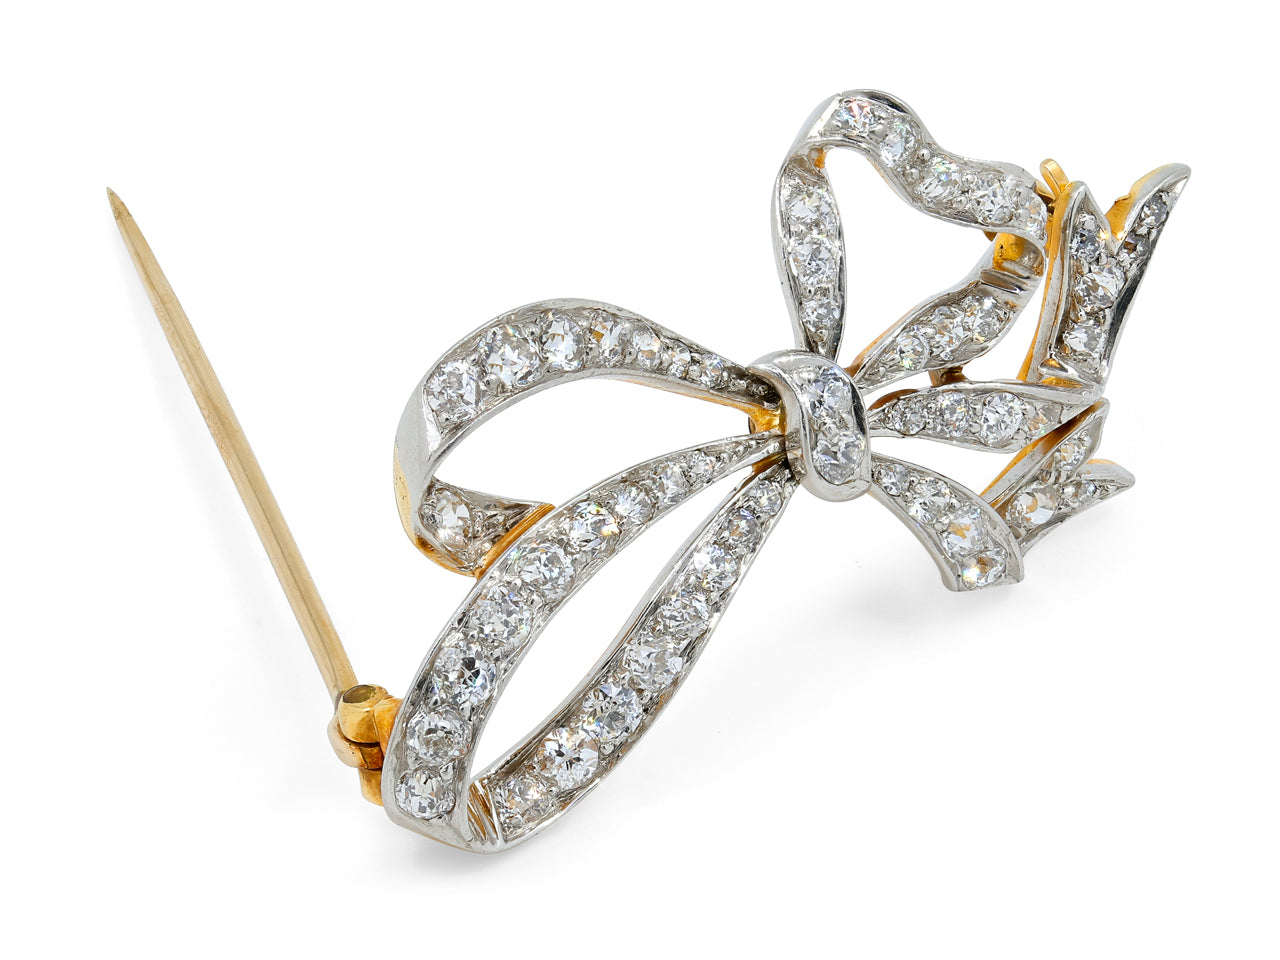 Antique Edwardian Diamond Bow Brooch in Platinum and 18K Gold